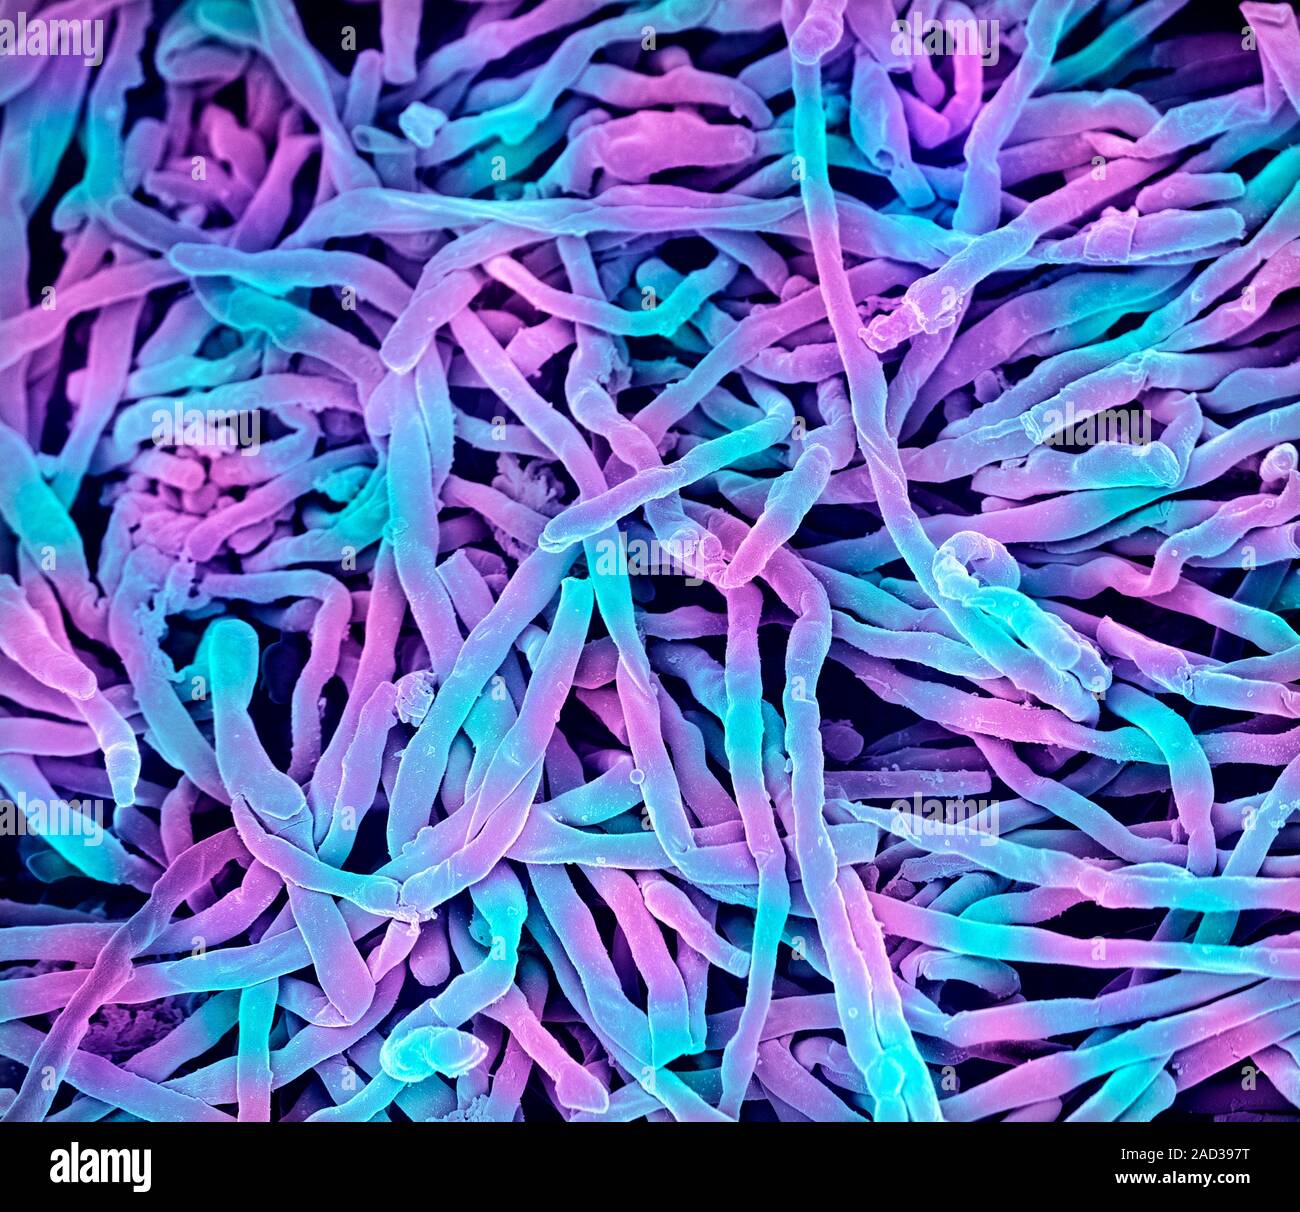 Streptomyces thermophilic bacteria. Coloured scanning electron ...